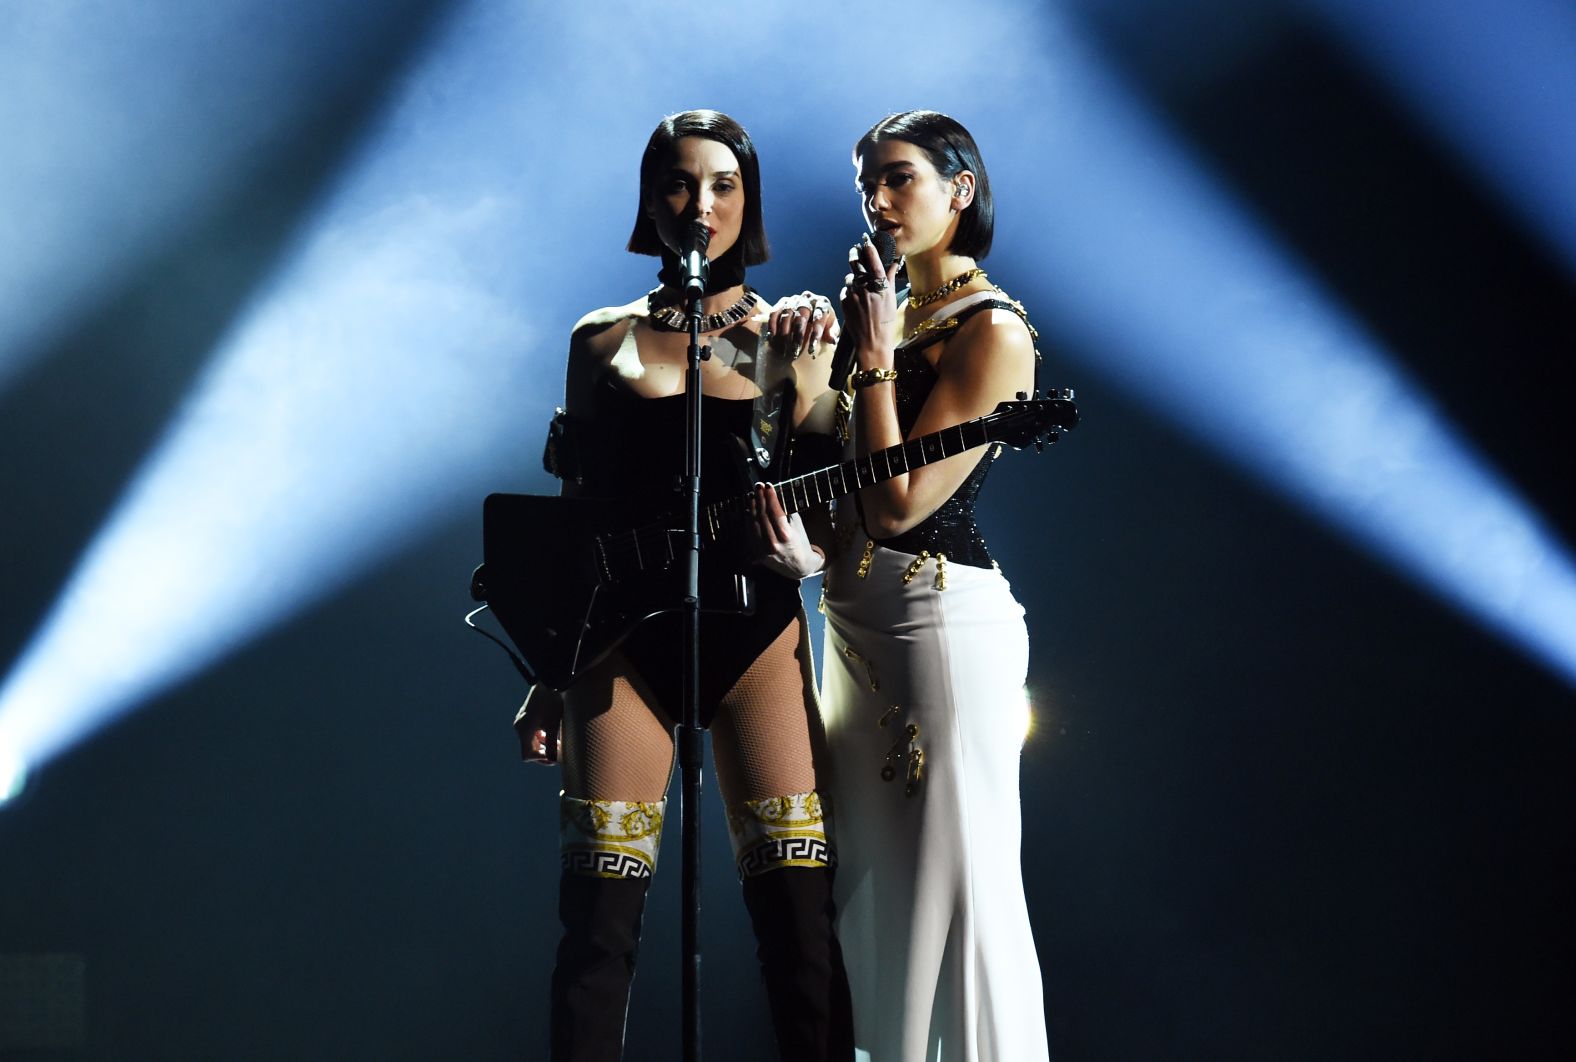 St. Vincent, left, and Dua Lipa sing together near the end of the show. Right after their performance, Lipa won the Grammy for best new artist.